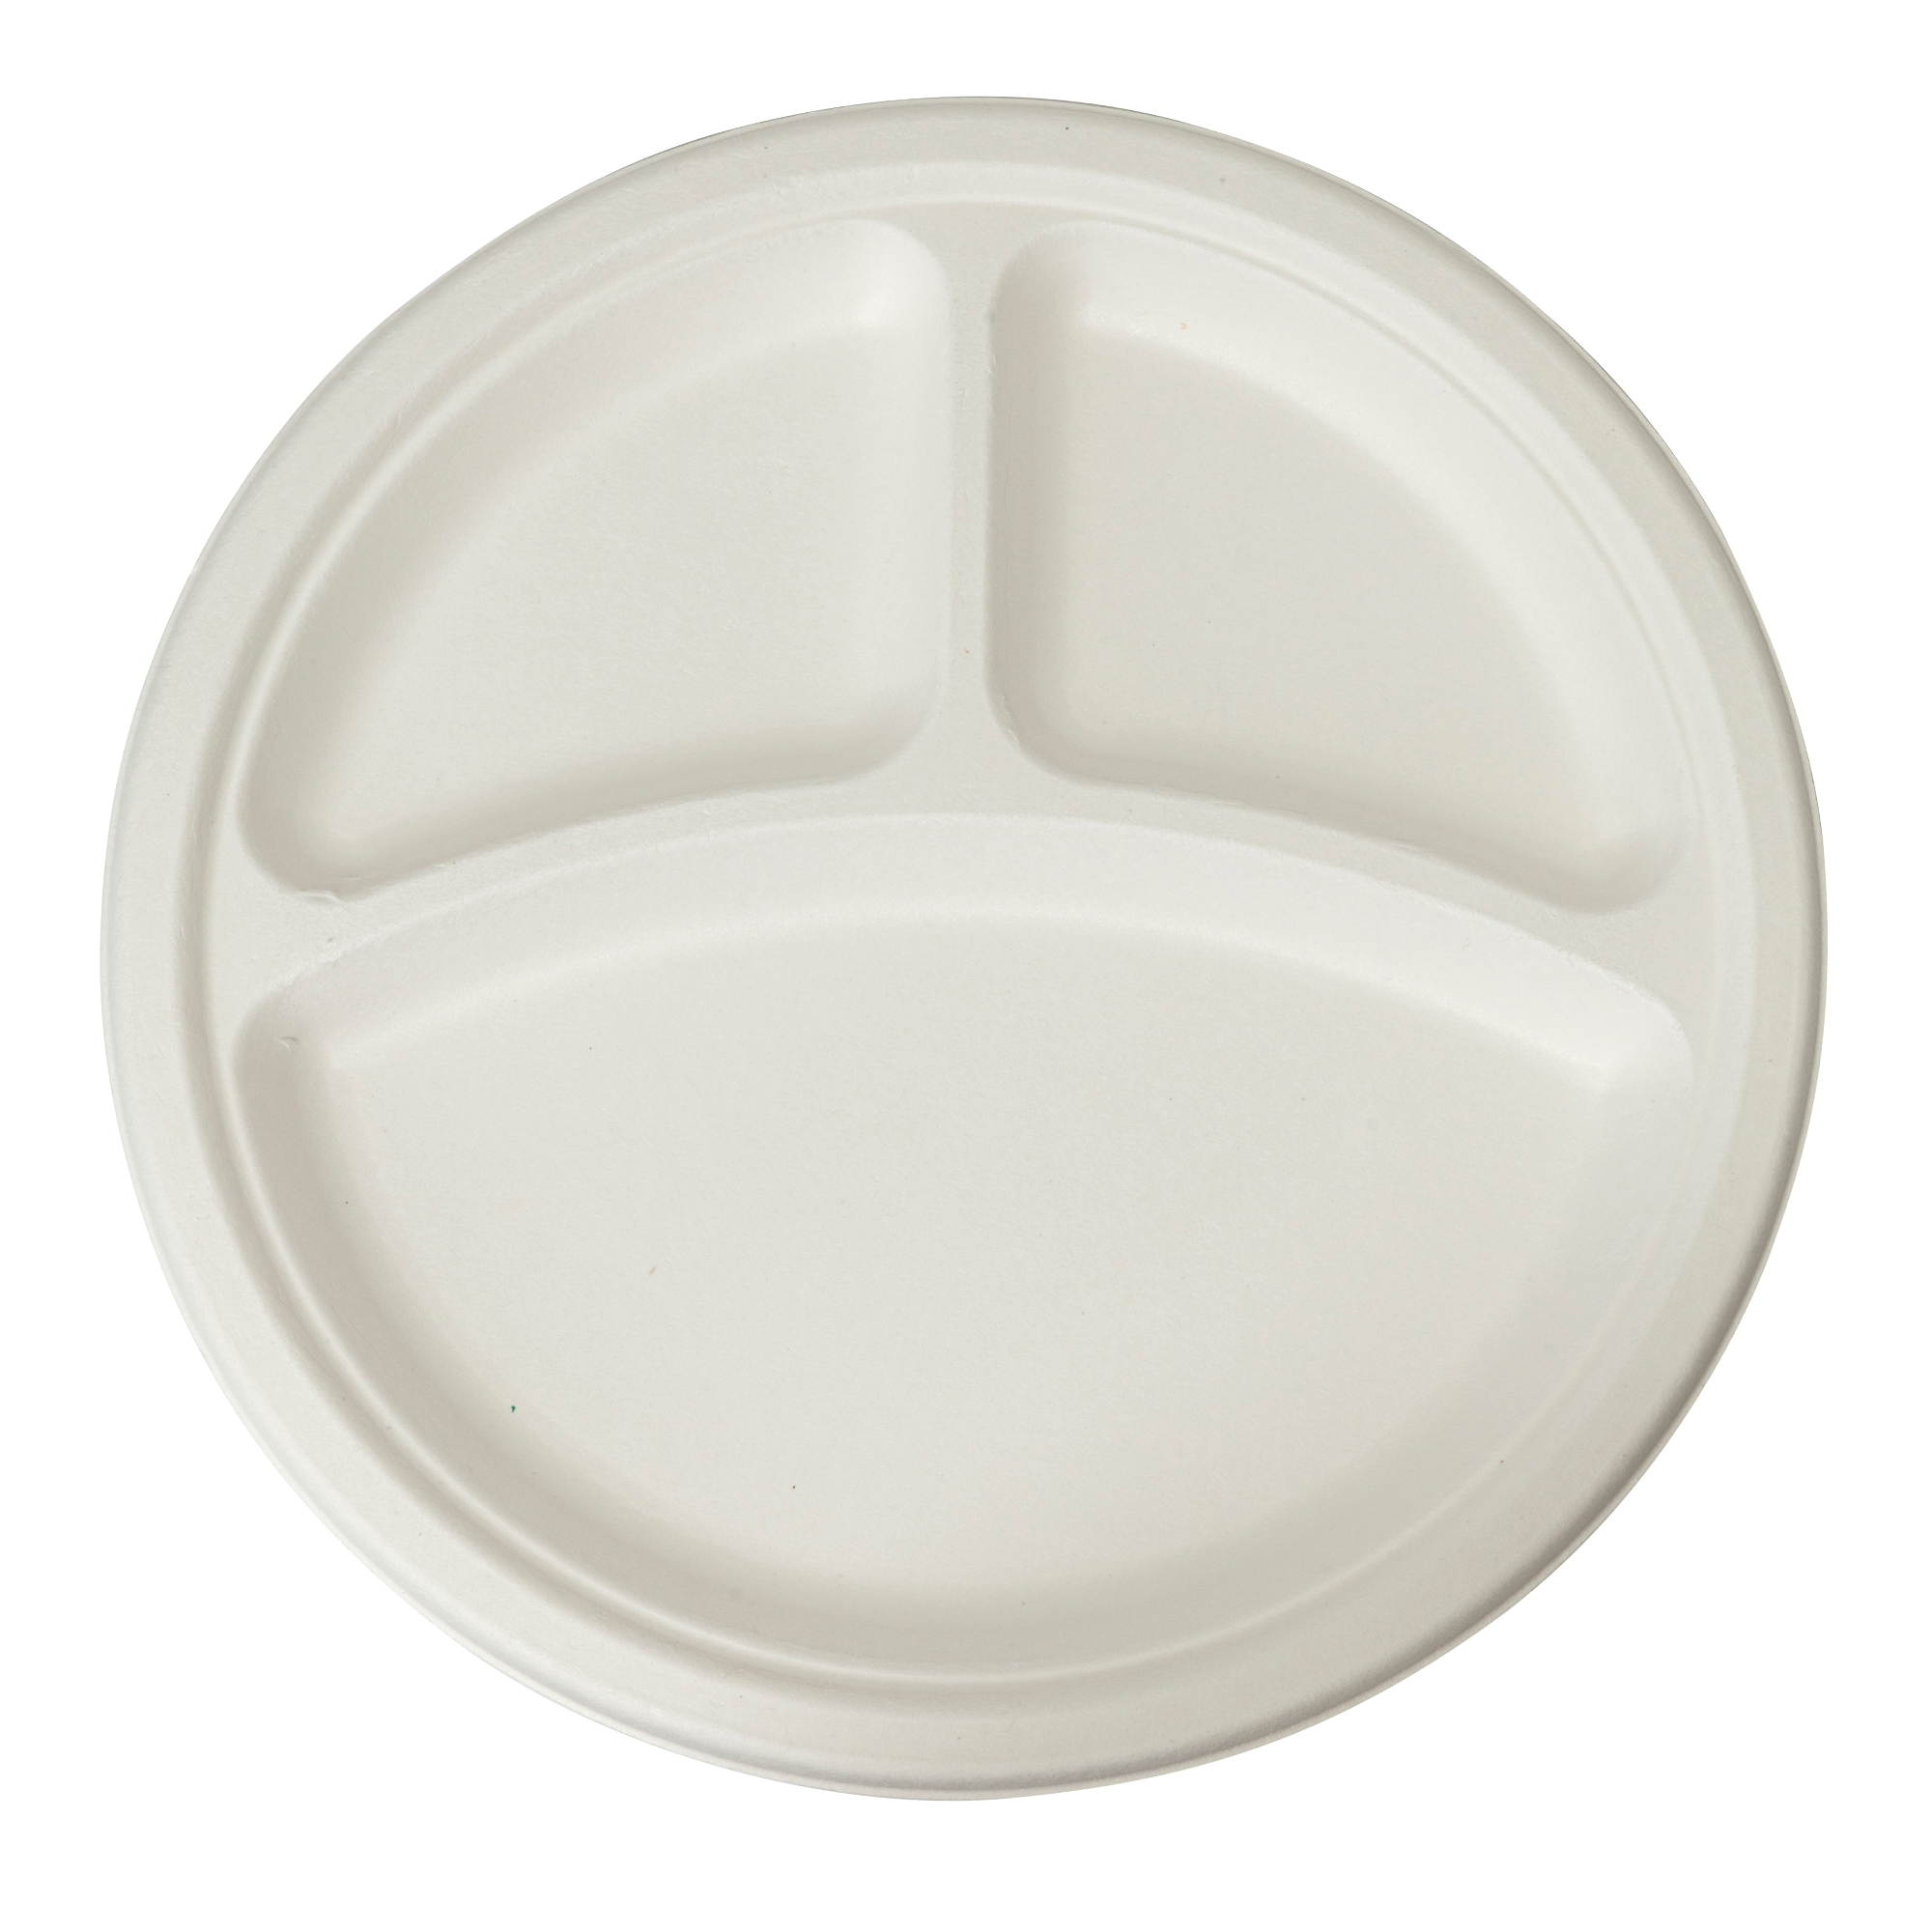 Round 3-Compartment Compostable Fiber Plate 10" 125pc/pack - White